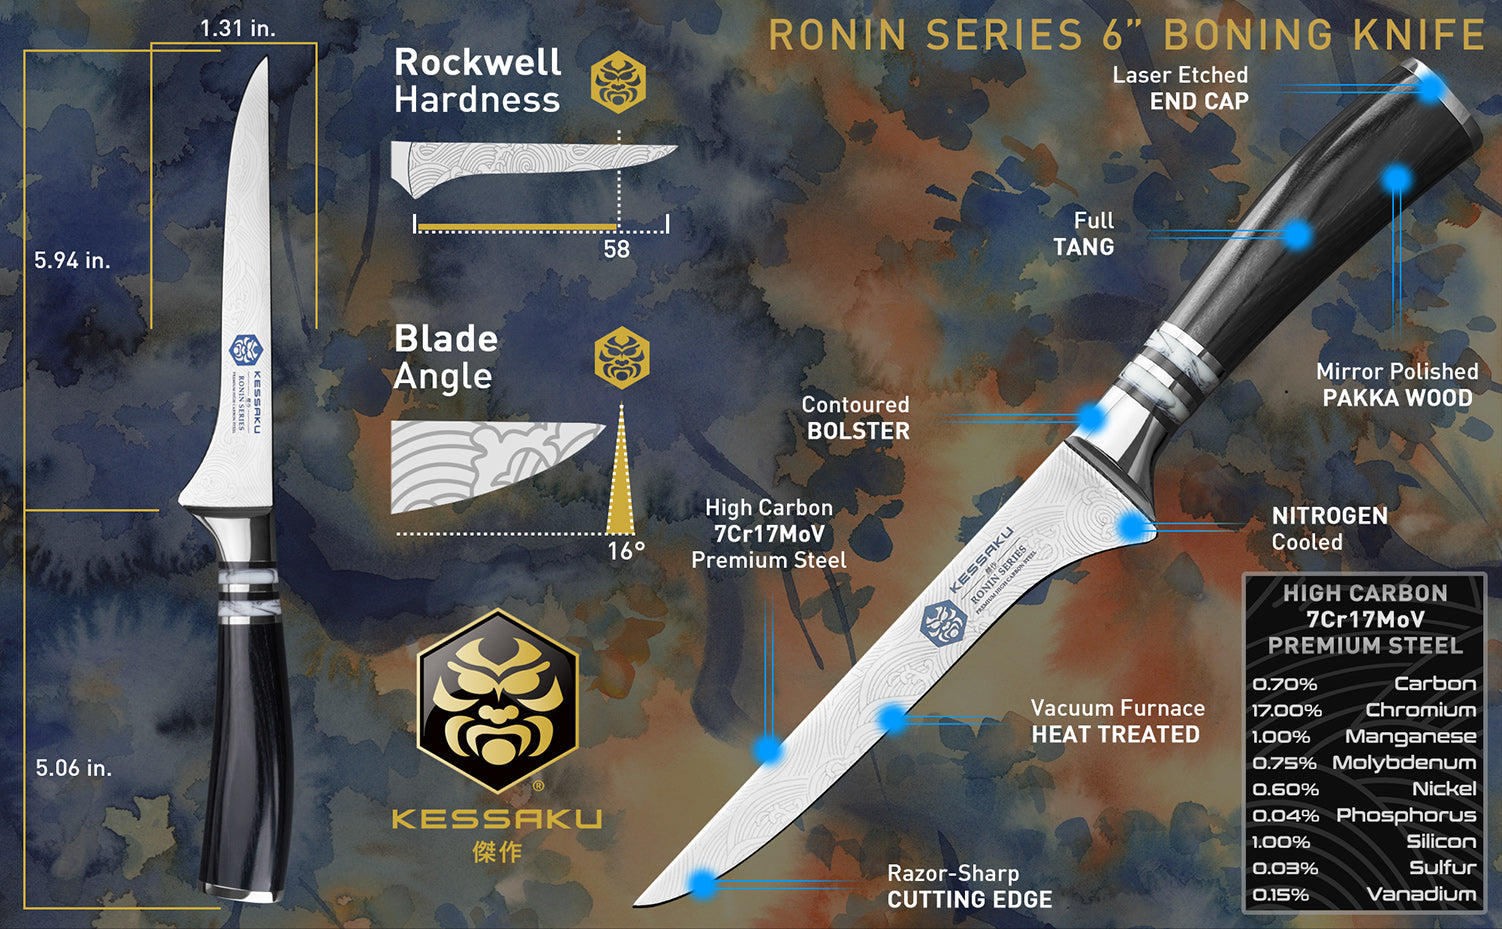 The Kessaku Ronin Series 6-Inch Boning Knife's features, dimensions, and steel composition